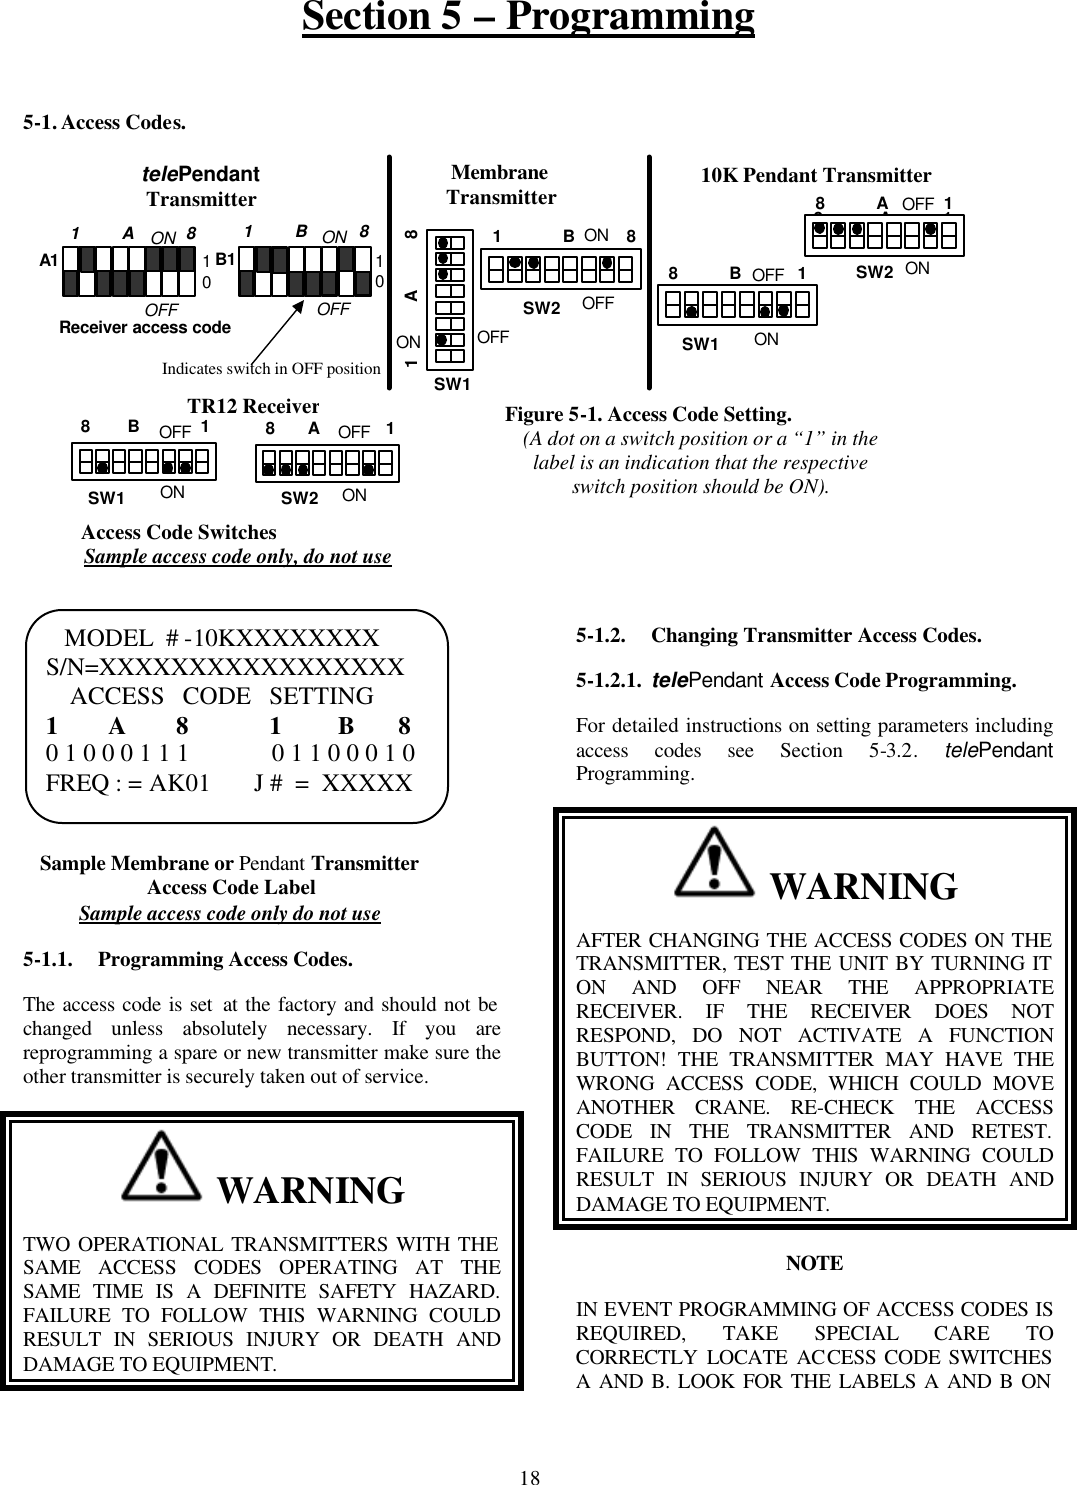 Section 5 – Programming  18   5-1. Access Codes.                                   5-1.1. Programming Access Codes. The access code is set at the factory and should not be changed unless absolutely necessary. If you are reprogramming a spare or new transmitter make sure the other transmitter is securely taken out of service.    WARNING TWO OPERATIONAL TRANSMITTERS WITH THE SAME ACCESS CODES OPERATING AT THE SAME TIME IS A DEFINITE SAFETY HAZARD. FAILURE TO FOLLOW THIS WARNING COULD RESULT IN SERIOUS INJURY OR DEATH AND DAMAGE TO EQUIPMENT.            5-1.2. Changing Transmitter Access Codes. 5-1.2.1. telePendant Access Code Programming. For detailed instructions on setting parameters including access codes see  Section  5-3.2.  telePendant Programming.   WARNING AFTER CHANGING THE ACCESS CODES ON THE TRANSMITTER, TEST THE UNIT BY TURNING IT ON AND OFF NEAR THE APPROPRIATE RECEIVER. IF THE RECEIVER DOES NOT RESPOND, DO NOT ACTIVATE A FUNCTION BUTTON! THE TRANSMITTER MAY HAVE THE WRONG ACCESS CODE, WHICH COULD MOVE ANOTHER CRANE. RE-CHECK THE ACCESS CODE IN THE TRANSMITTER AND RETEST. FAILURE TO FOLLOW THIS WARNING COULD RESULT IN SERIOUS INJURY OR DEATH AND DAMAGE TO EQUIPMENT. NOTE IN EVENT PROGRAMMING OF ACCESS CODES IS REQUIRED, TAKE SPECIAL CARE TO CORRECTLY LOCATE ACCESS CODE SWITCHES A AND B. LOOK FOR THE LABELS A AND B ON Figure 5-1. Access Code Setting. (A dot on a switch position or a “1” in the label is an indication that the respective switch position should be ON). Sample Membrane or Pendant Transmitter Access Code Label Sample access code only do not use SW1 Membrane Transmitter 10K Pendant Transmitter SW1 OFF  1            A           8 ON OFF ON  8           B            1    MODEL  # -10KXXXXXXXX S/N=XXXXXXXXXXXXXXXXX     ACCESS   CODE   SETTING 1        A        8             1         B       8 0 1 0 0 0 1 1 1             0 1 1 0 0 0 1 0 FREQ : = AK01       J #  =  XXXXX    Access Code Switches Sample access code only, do not use  SW2 ON ON SW1  8       A              1 OFF OFF    8        B             1 TR12 Receiver ON  8            A           1 SW2 OFF  8           A            1  1             B           8 OFF ON SW2 OFF A1 telePendant Transmitter  1         A           8 ON OFF  1         B           8 ON OFF B1 Receiver access code 1 0 1 0 Indicates switch in OFF position 